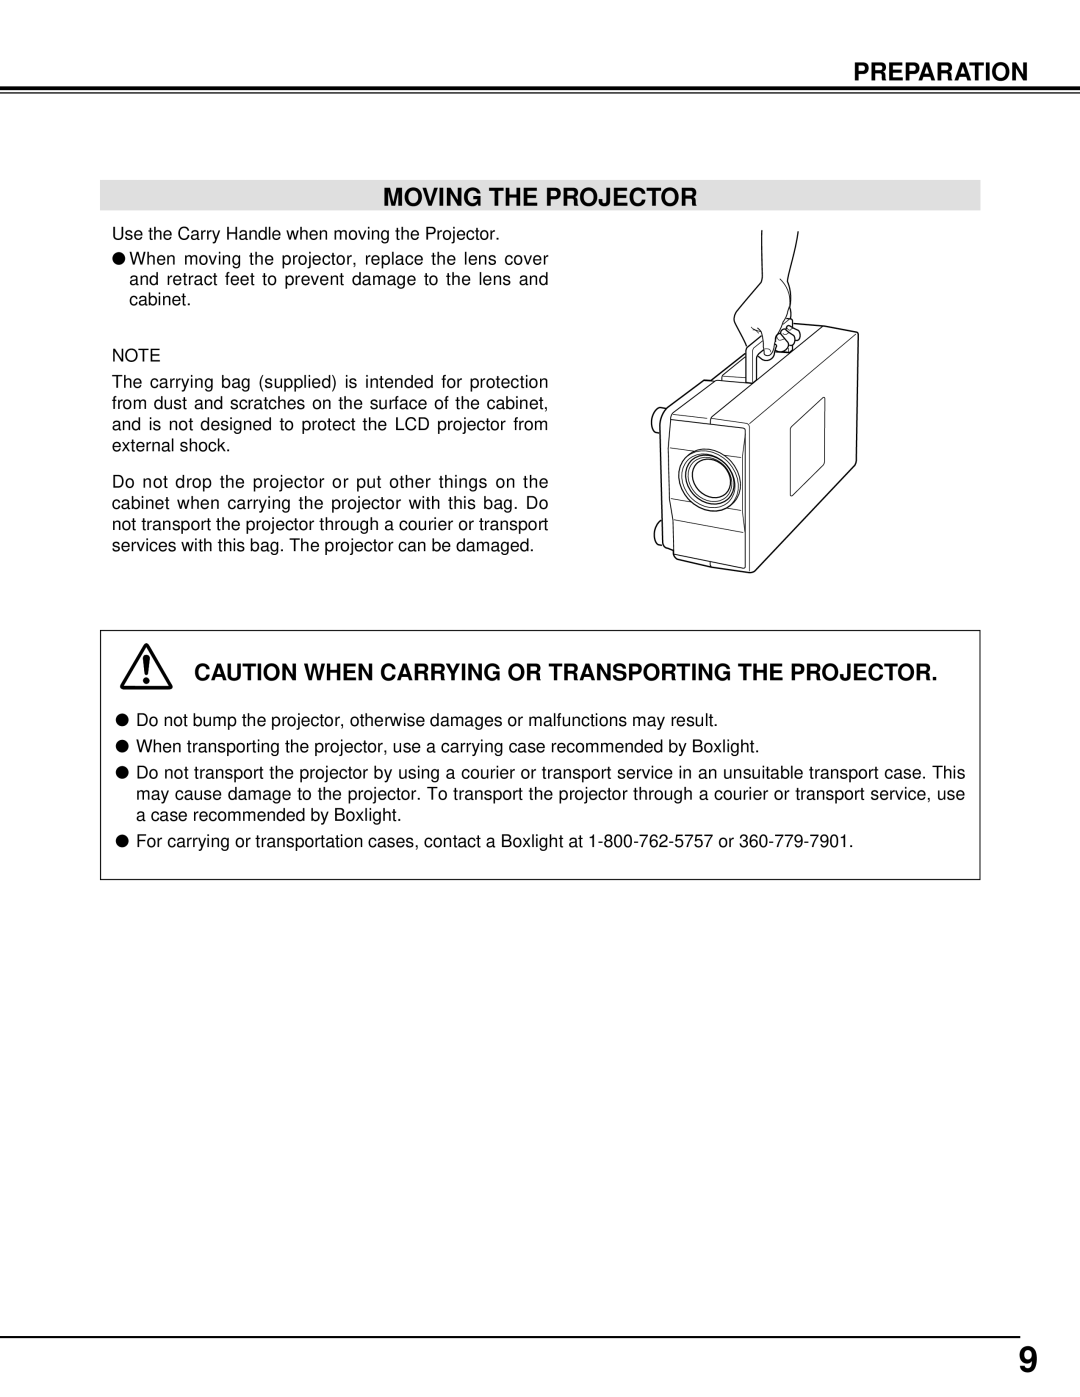 BOXLIGHT CP-14t manual Preparation Moving The Projector, Caution When Carrying Or Transporting The Projector 